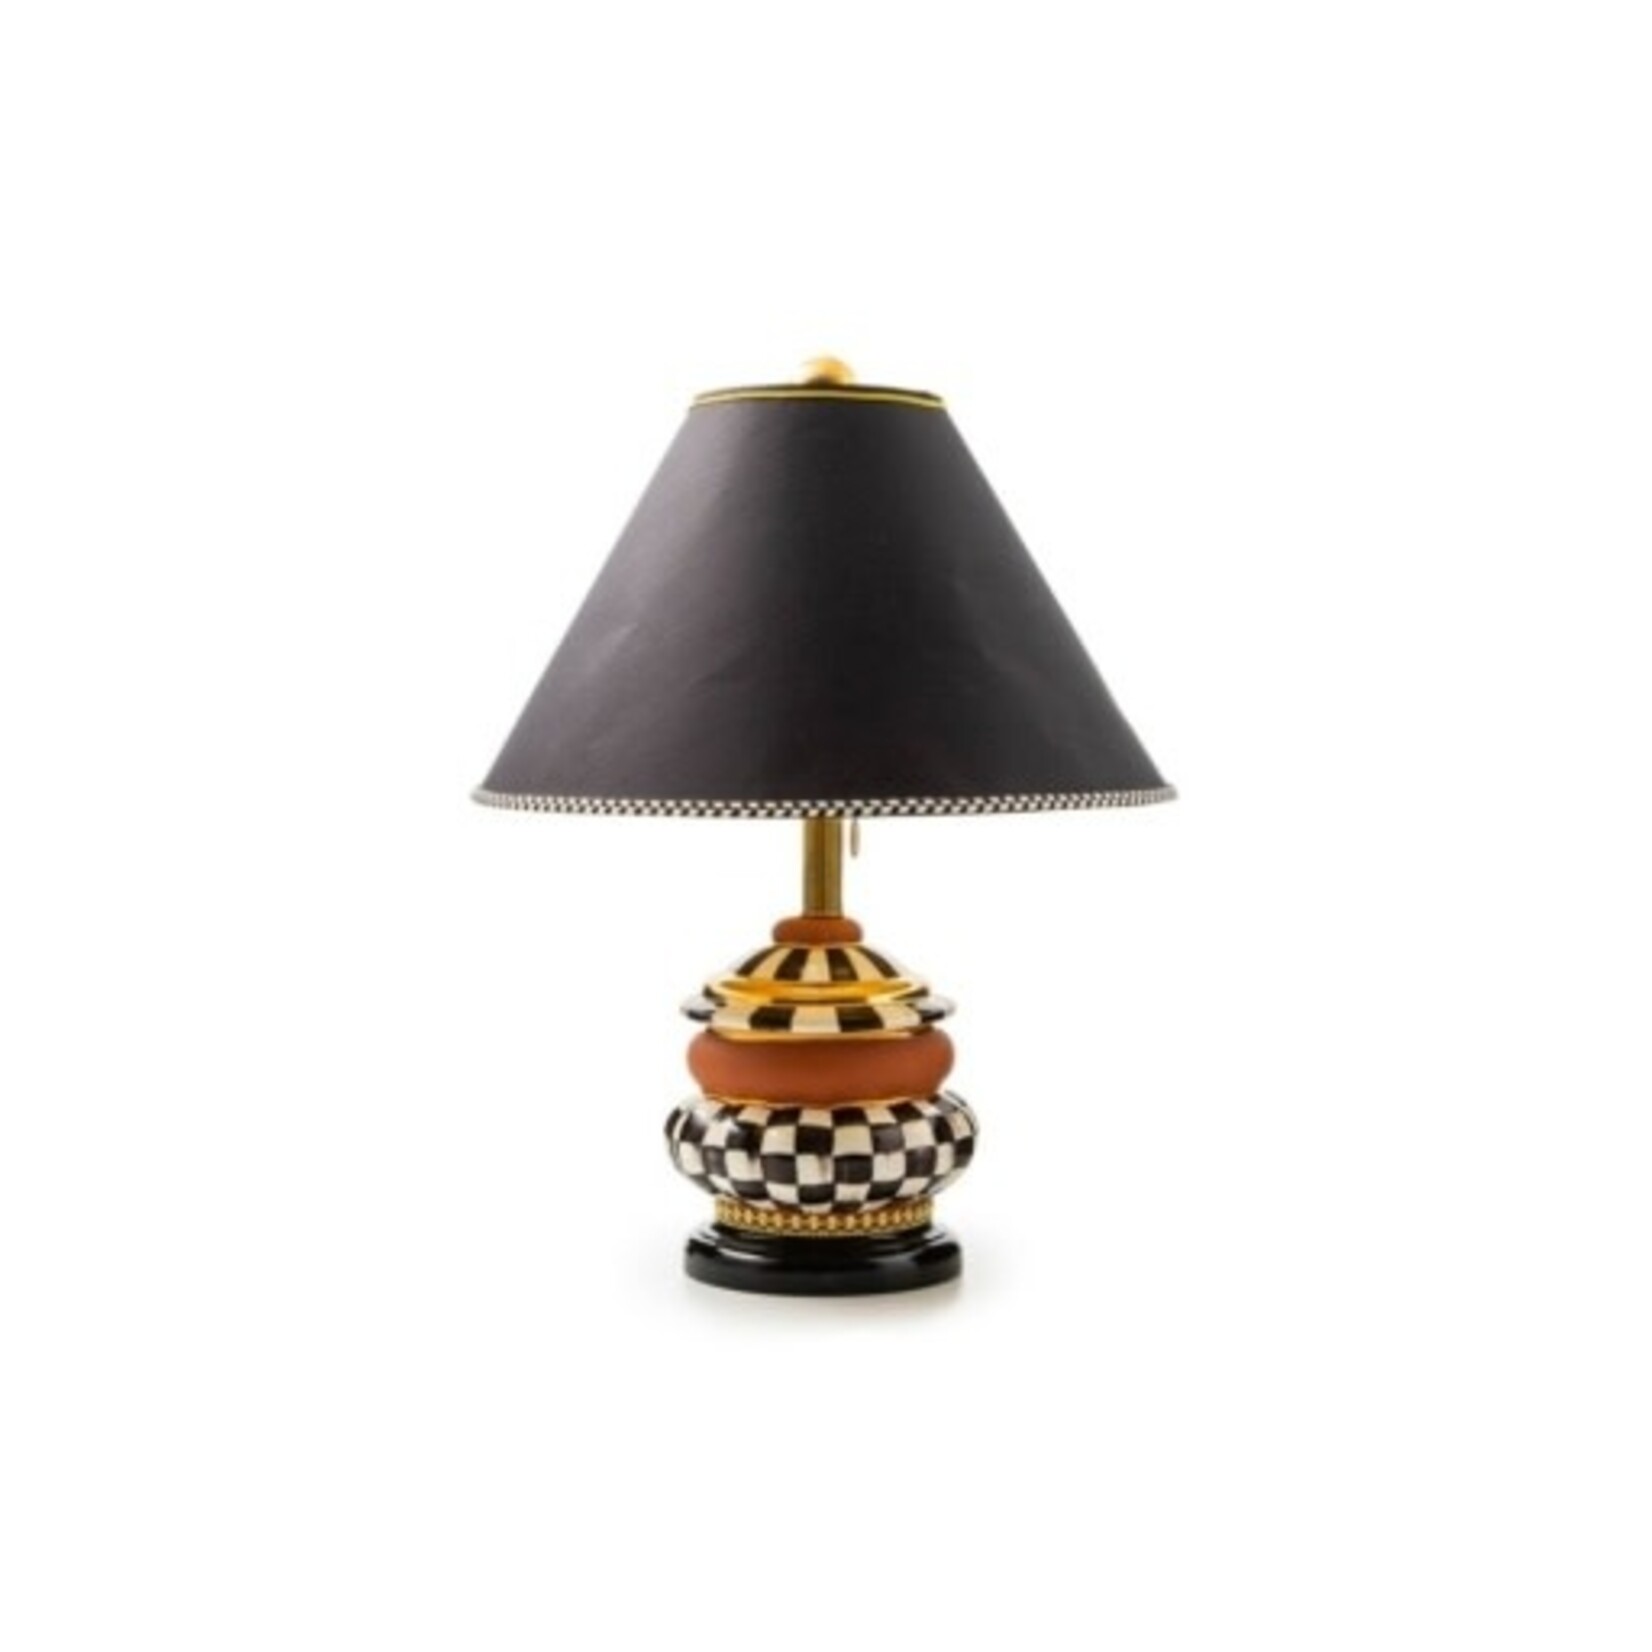 MacKenzie-Childs groovy table lamp - courtly check